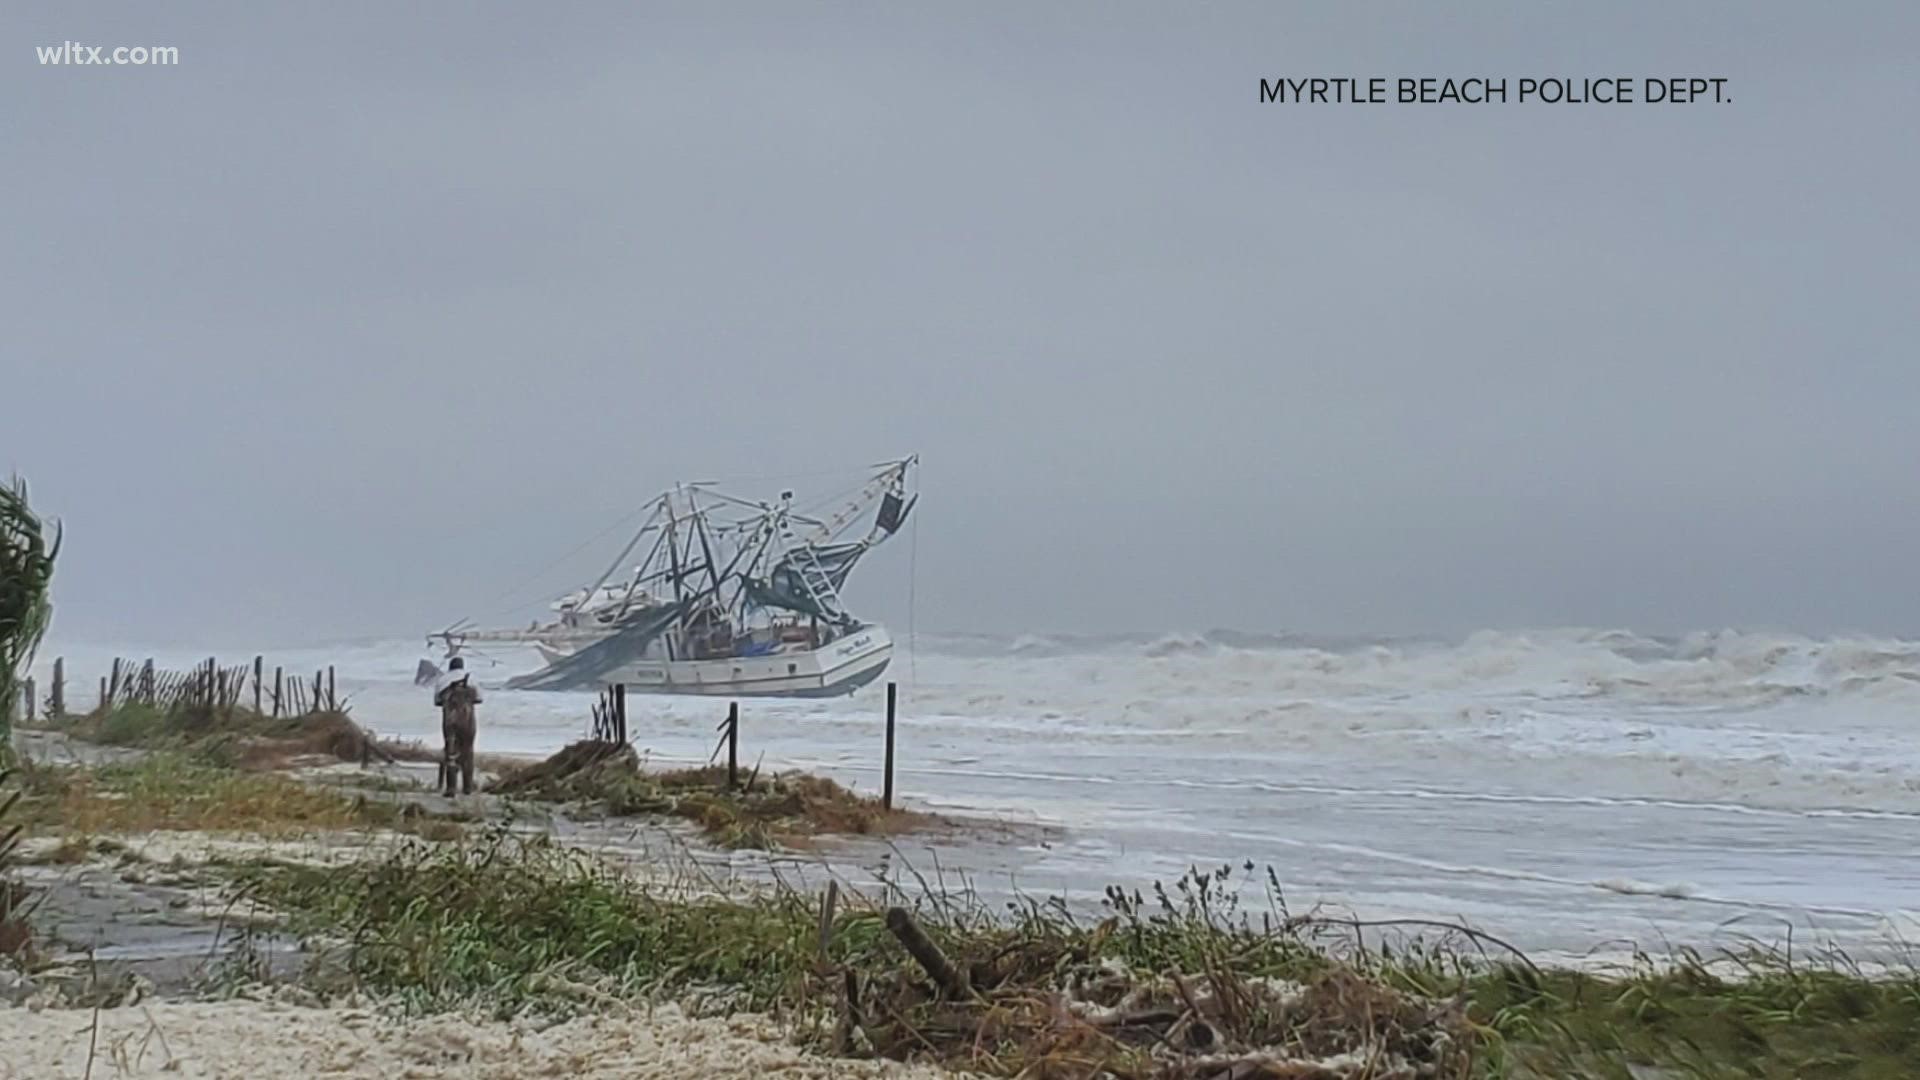 A commercial fishing boat anchored in the ocean near Myrtle Beach broke free and washed ashore on Friday, thanks to Hurricane Ian.